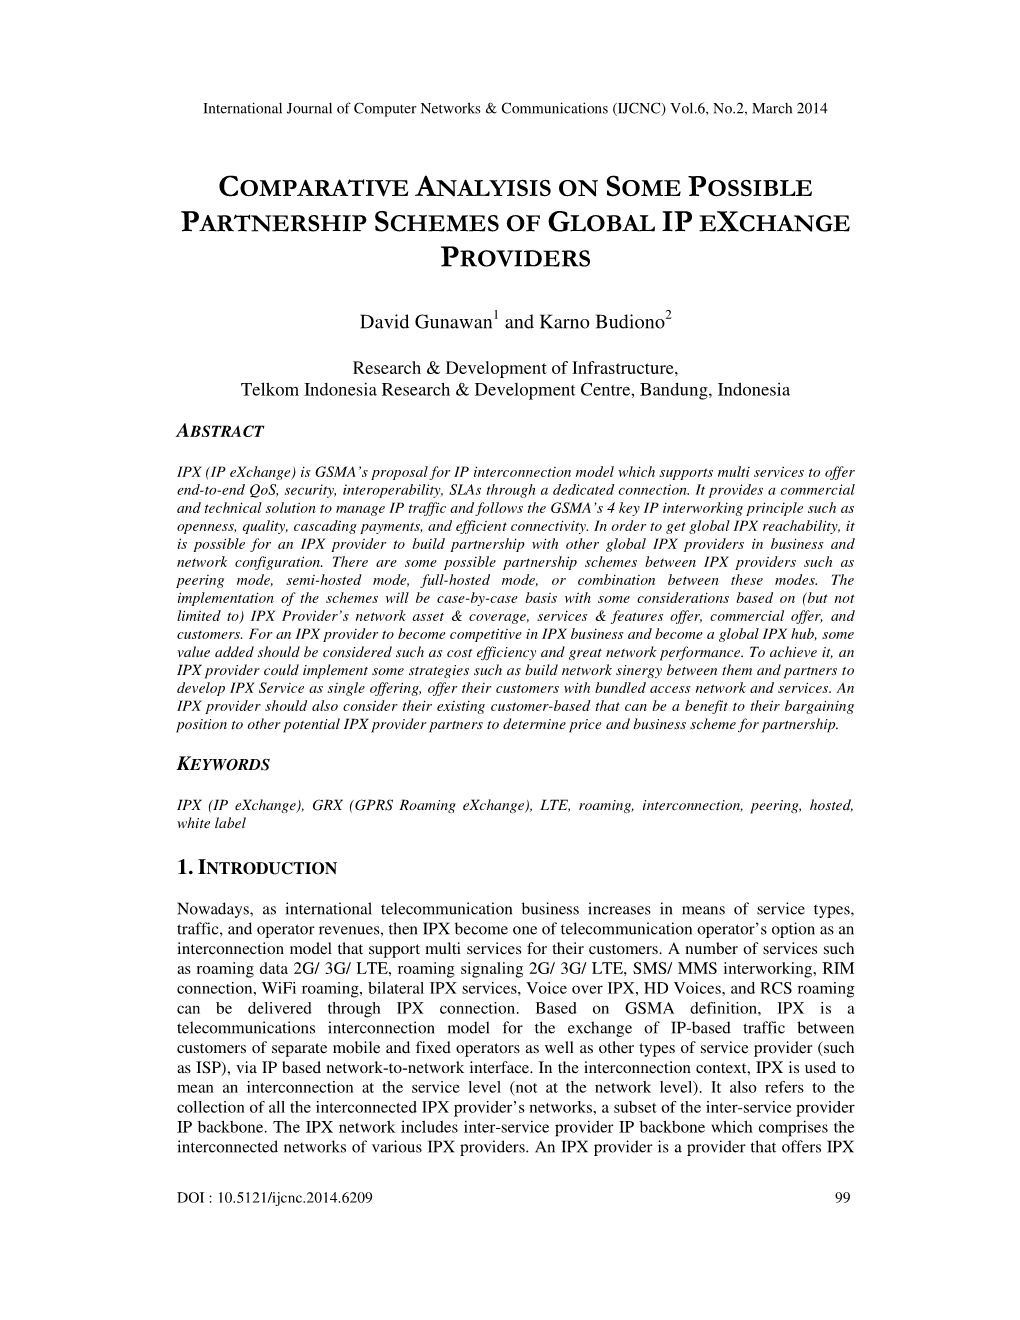 Comparative Analyisis on Some Possible Partnership Schemes of Global Ip Exchange Providers